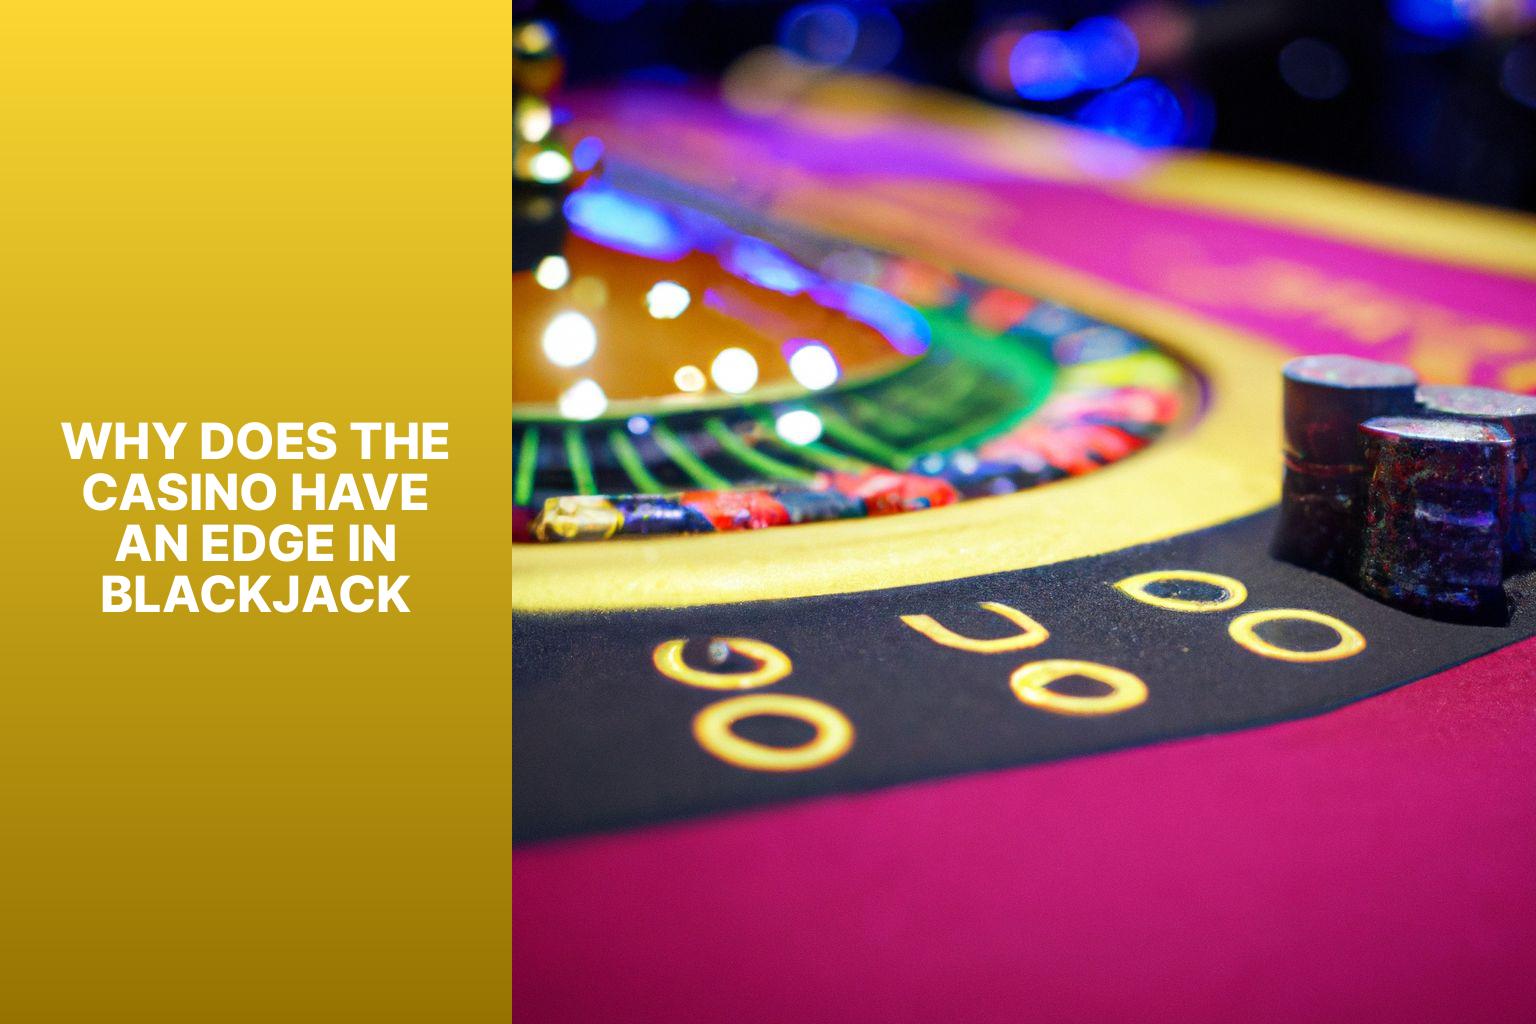 Why Does the Casino Have an Edge in Blackjack